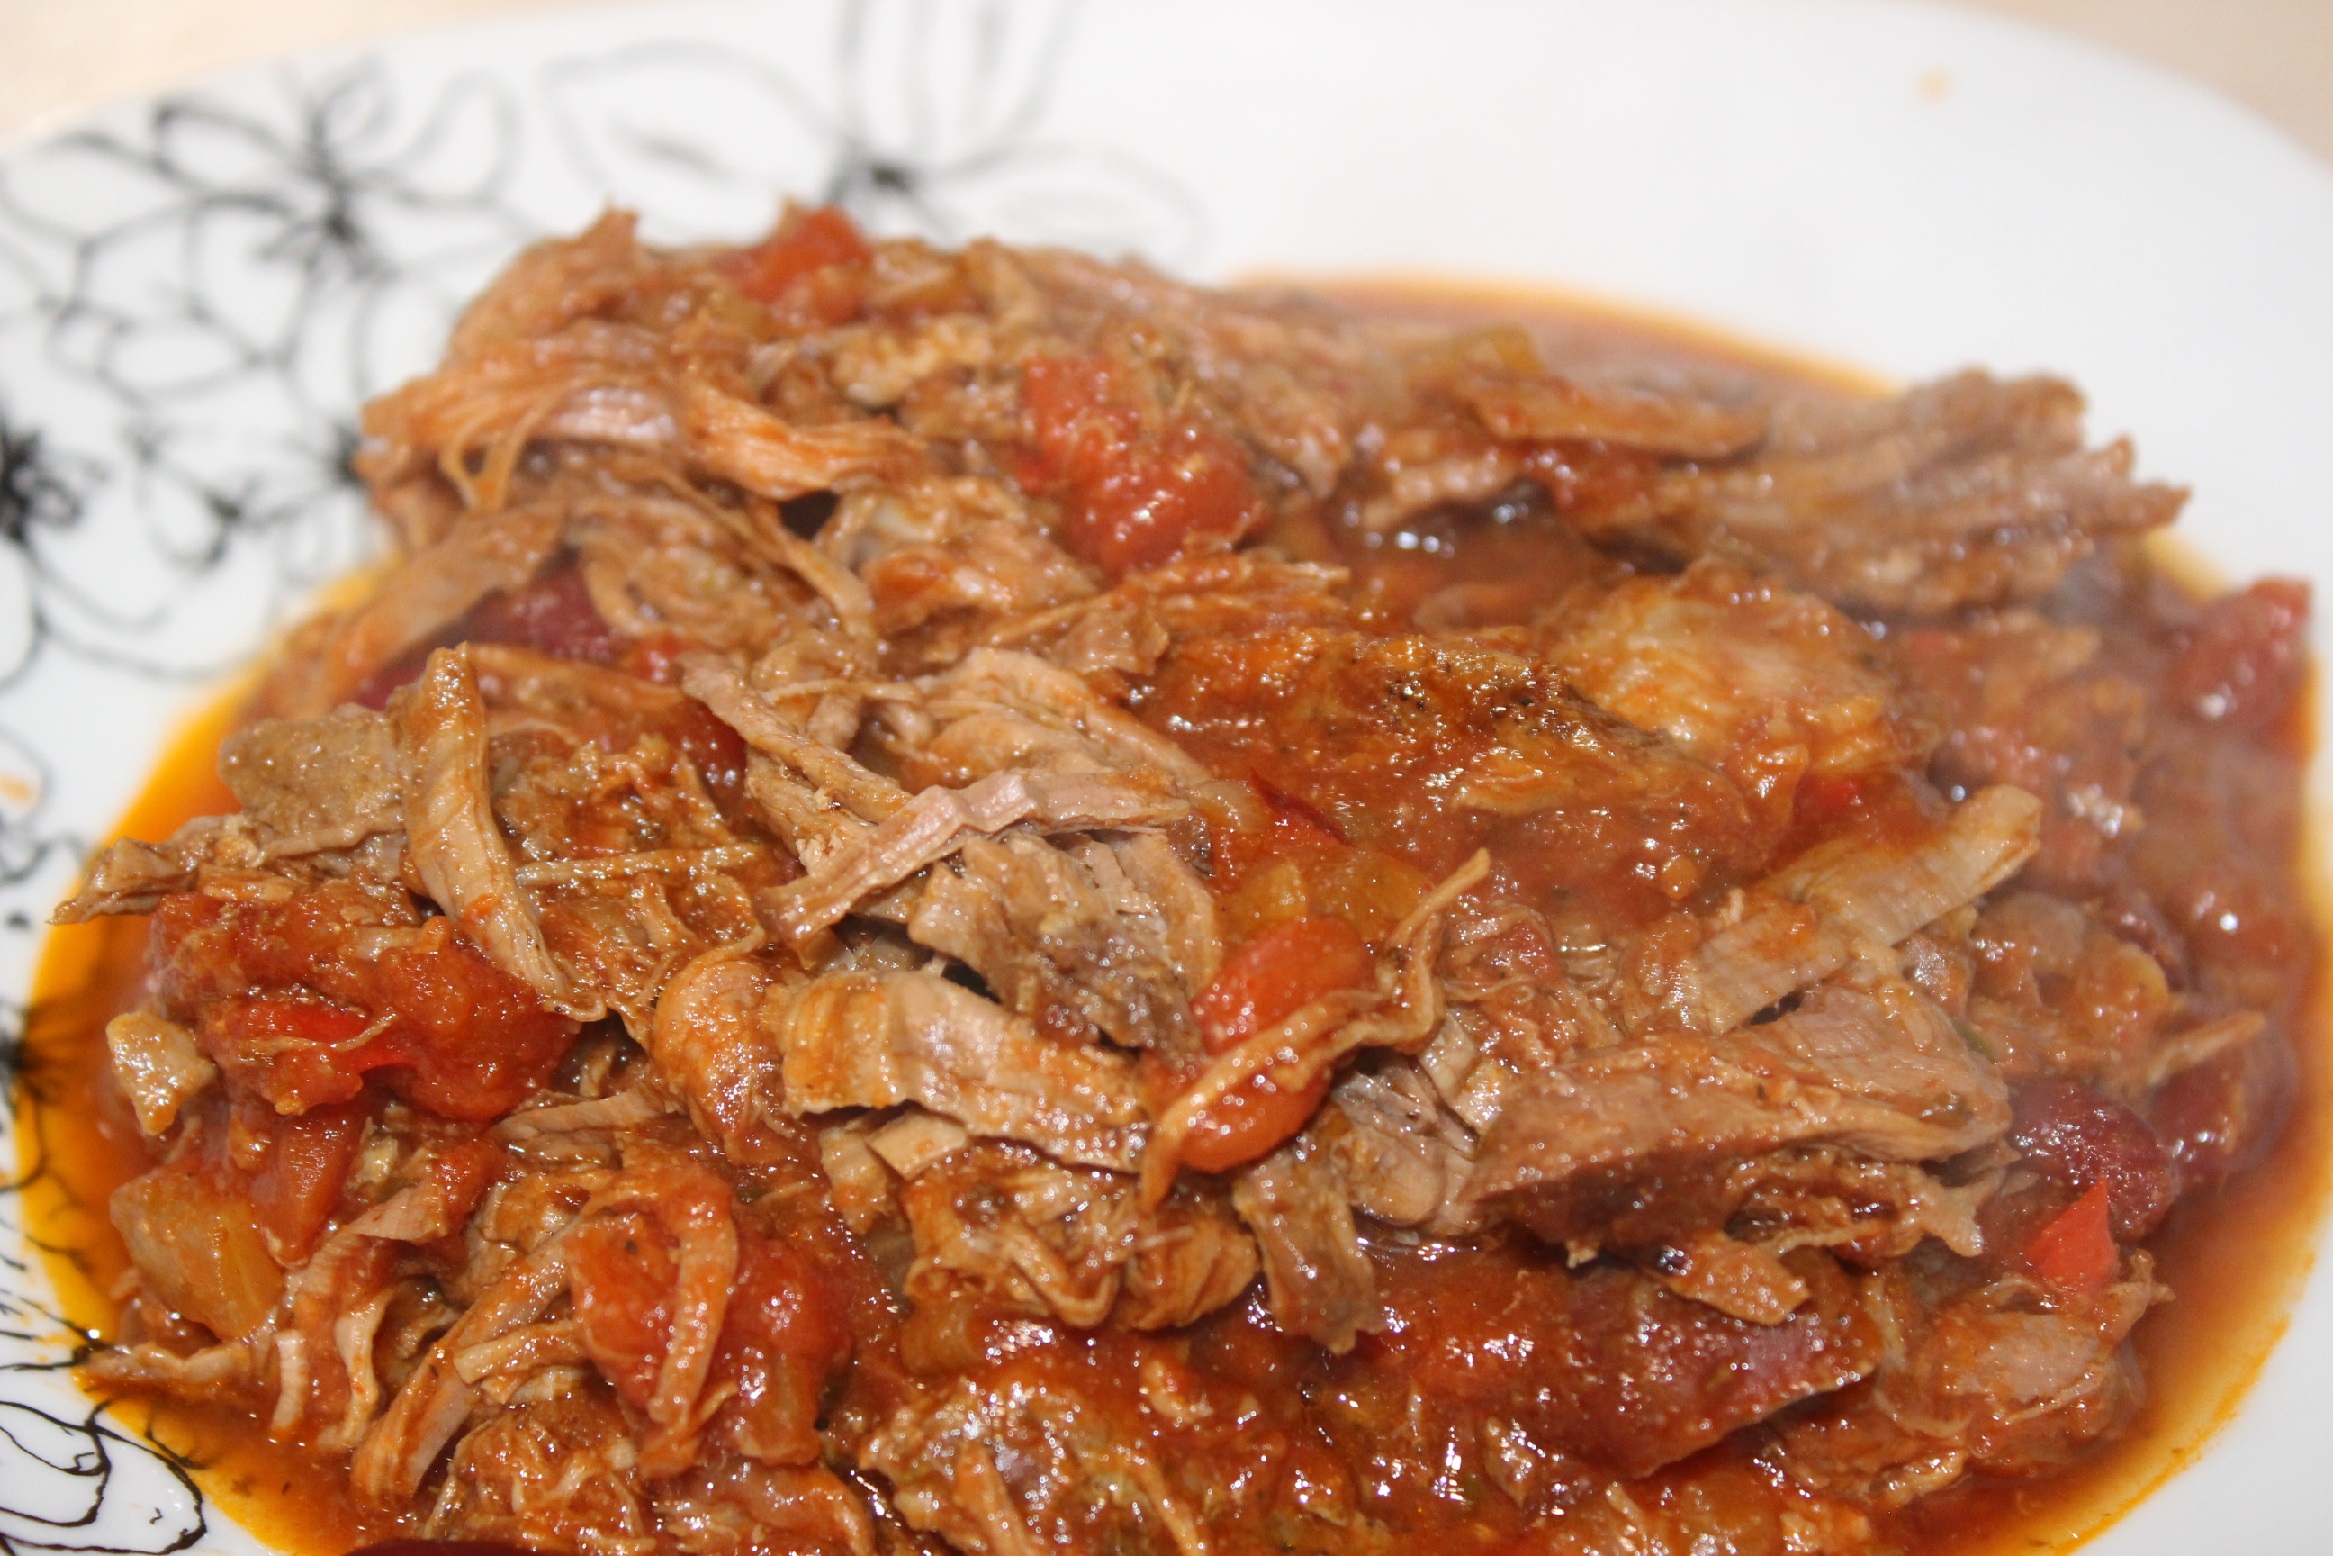 Pulled beef con carne